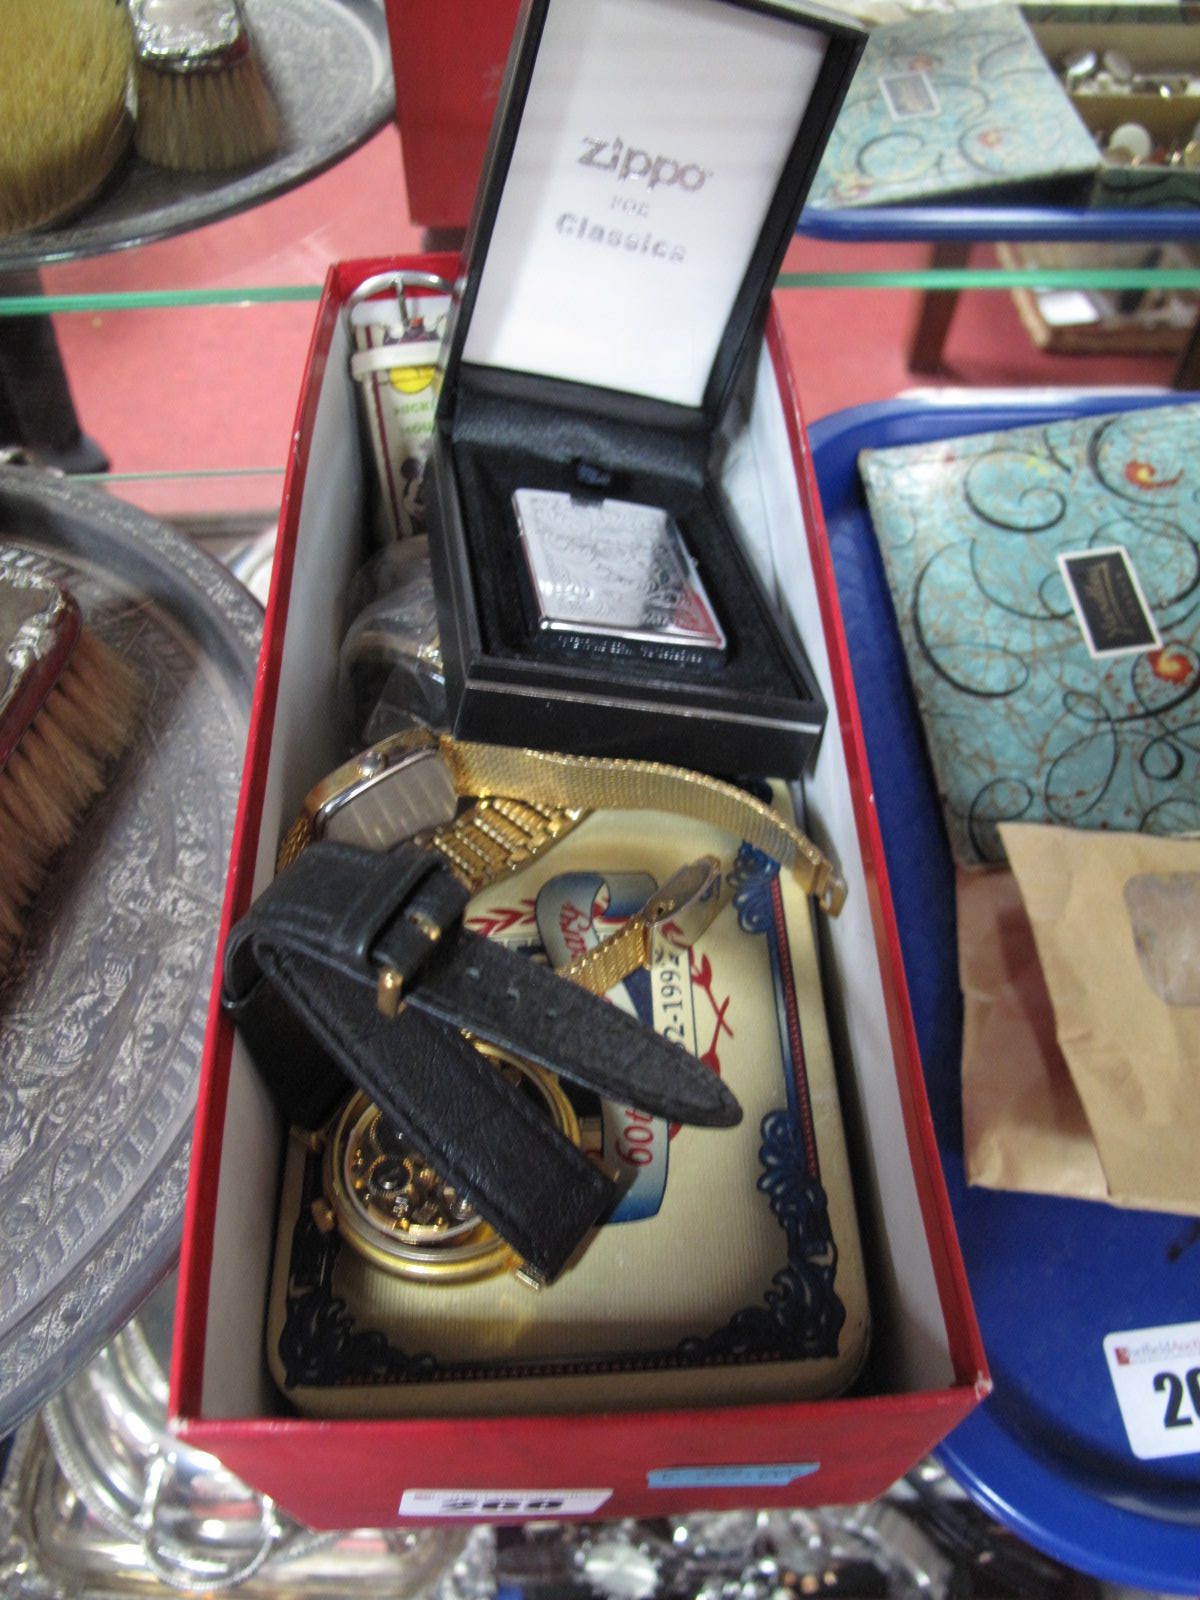 Seiko, Accurist, Mickey Mouse, Quemex, Cartiear and Other Watches, two Zippo and other lighters.